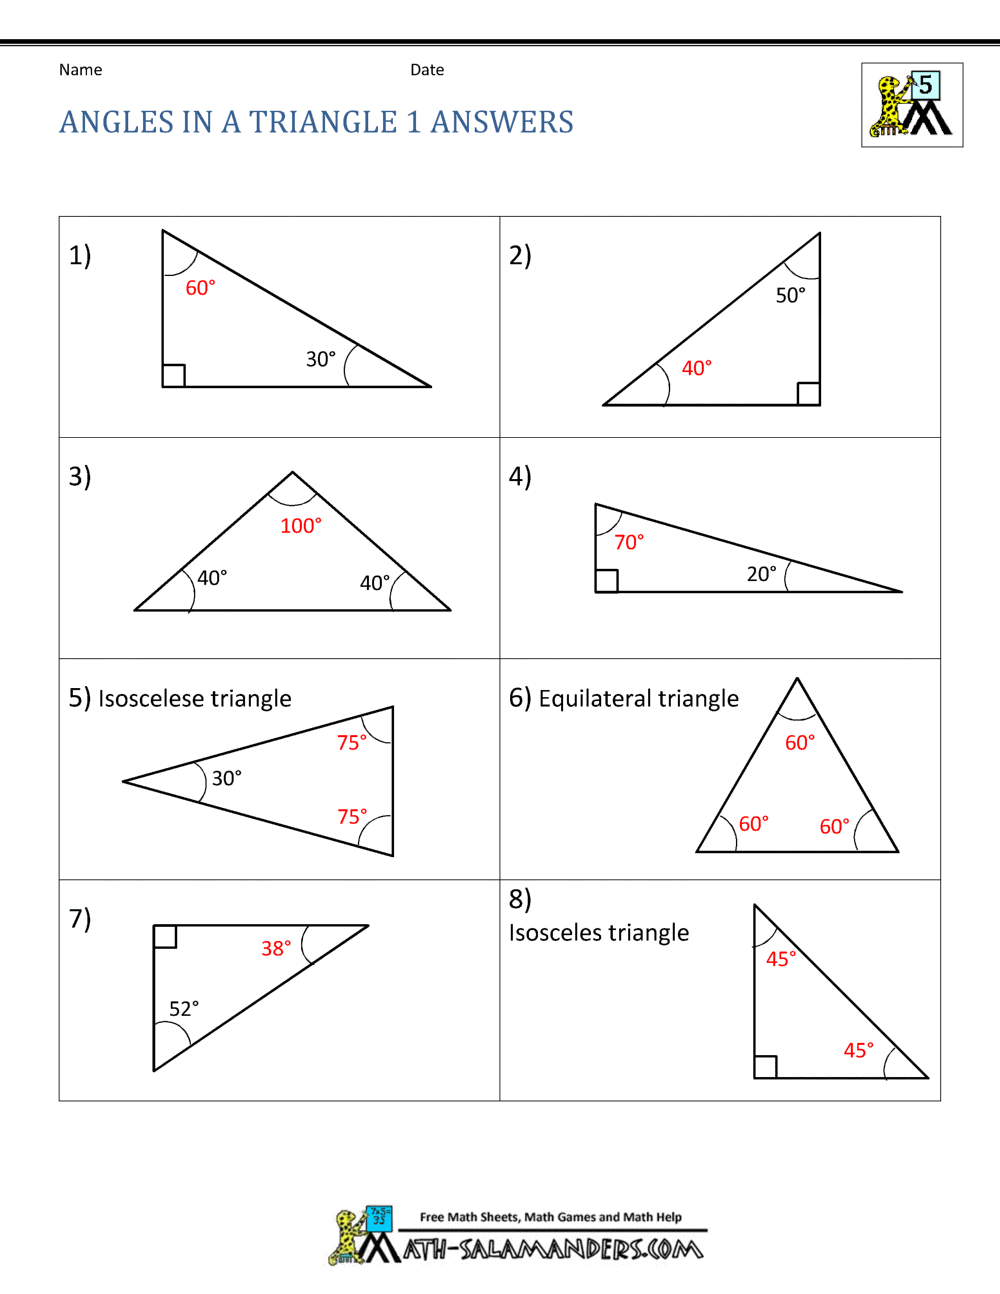 similar-triangles-worksheet-answers-pdf-try-this-sheet